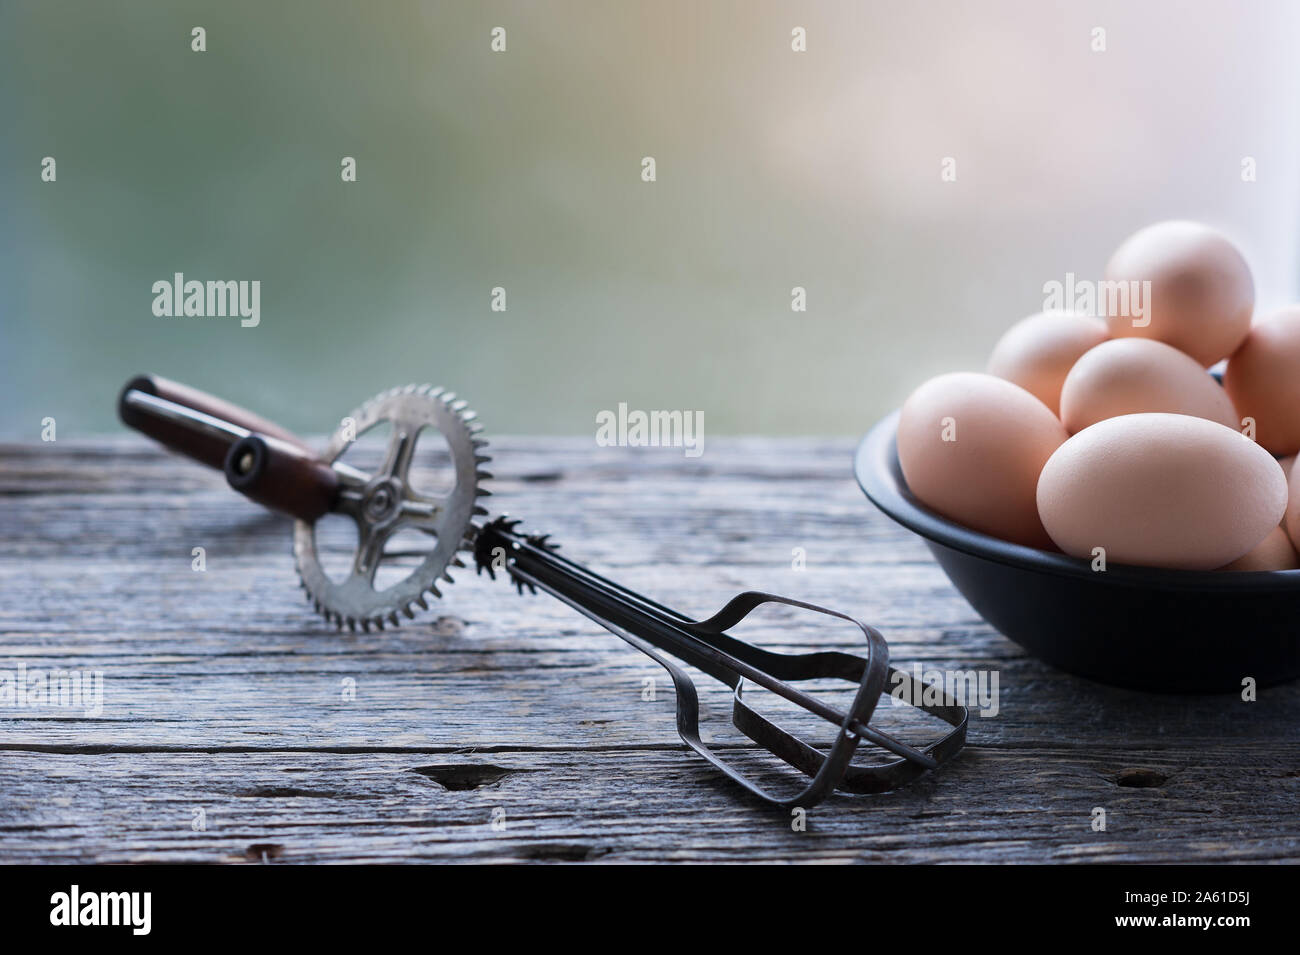 https://c8.alamy.com/comp/2A61D5J/old-egg-whisk-mixer-and-a-bowl-with-organic-eggs-on-the-rustic-weathered-grey-wooden-table-background-selective-focus-horizontal-with-copy-space-2A61D5J.jpg